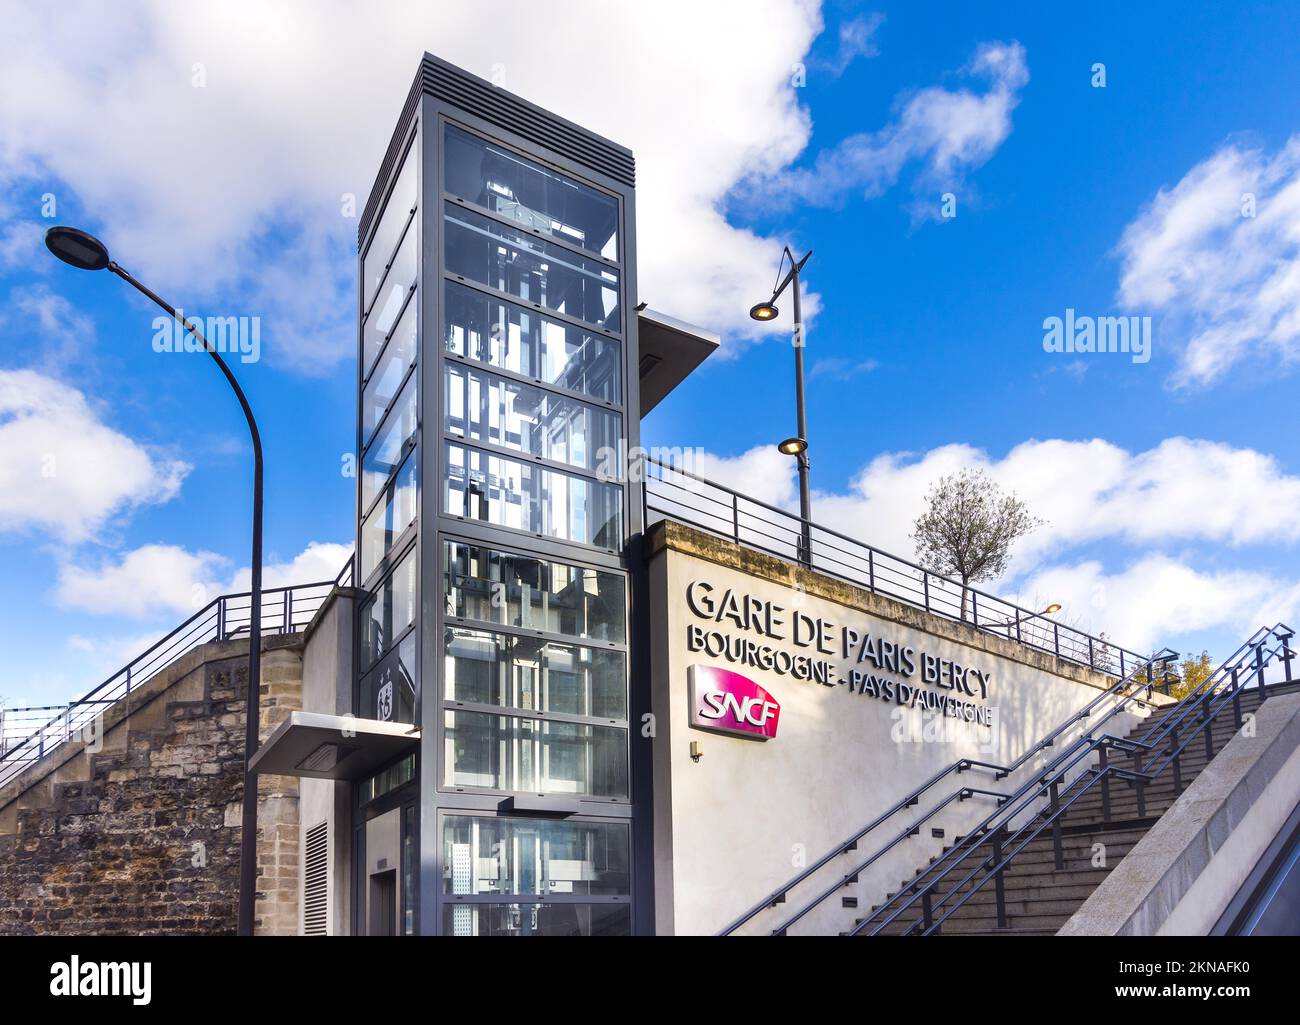 Disability lift and public stairs entrance to SNCF Gare de Paris Bercy (constructed 1977), Paris, France. Stock Photo